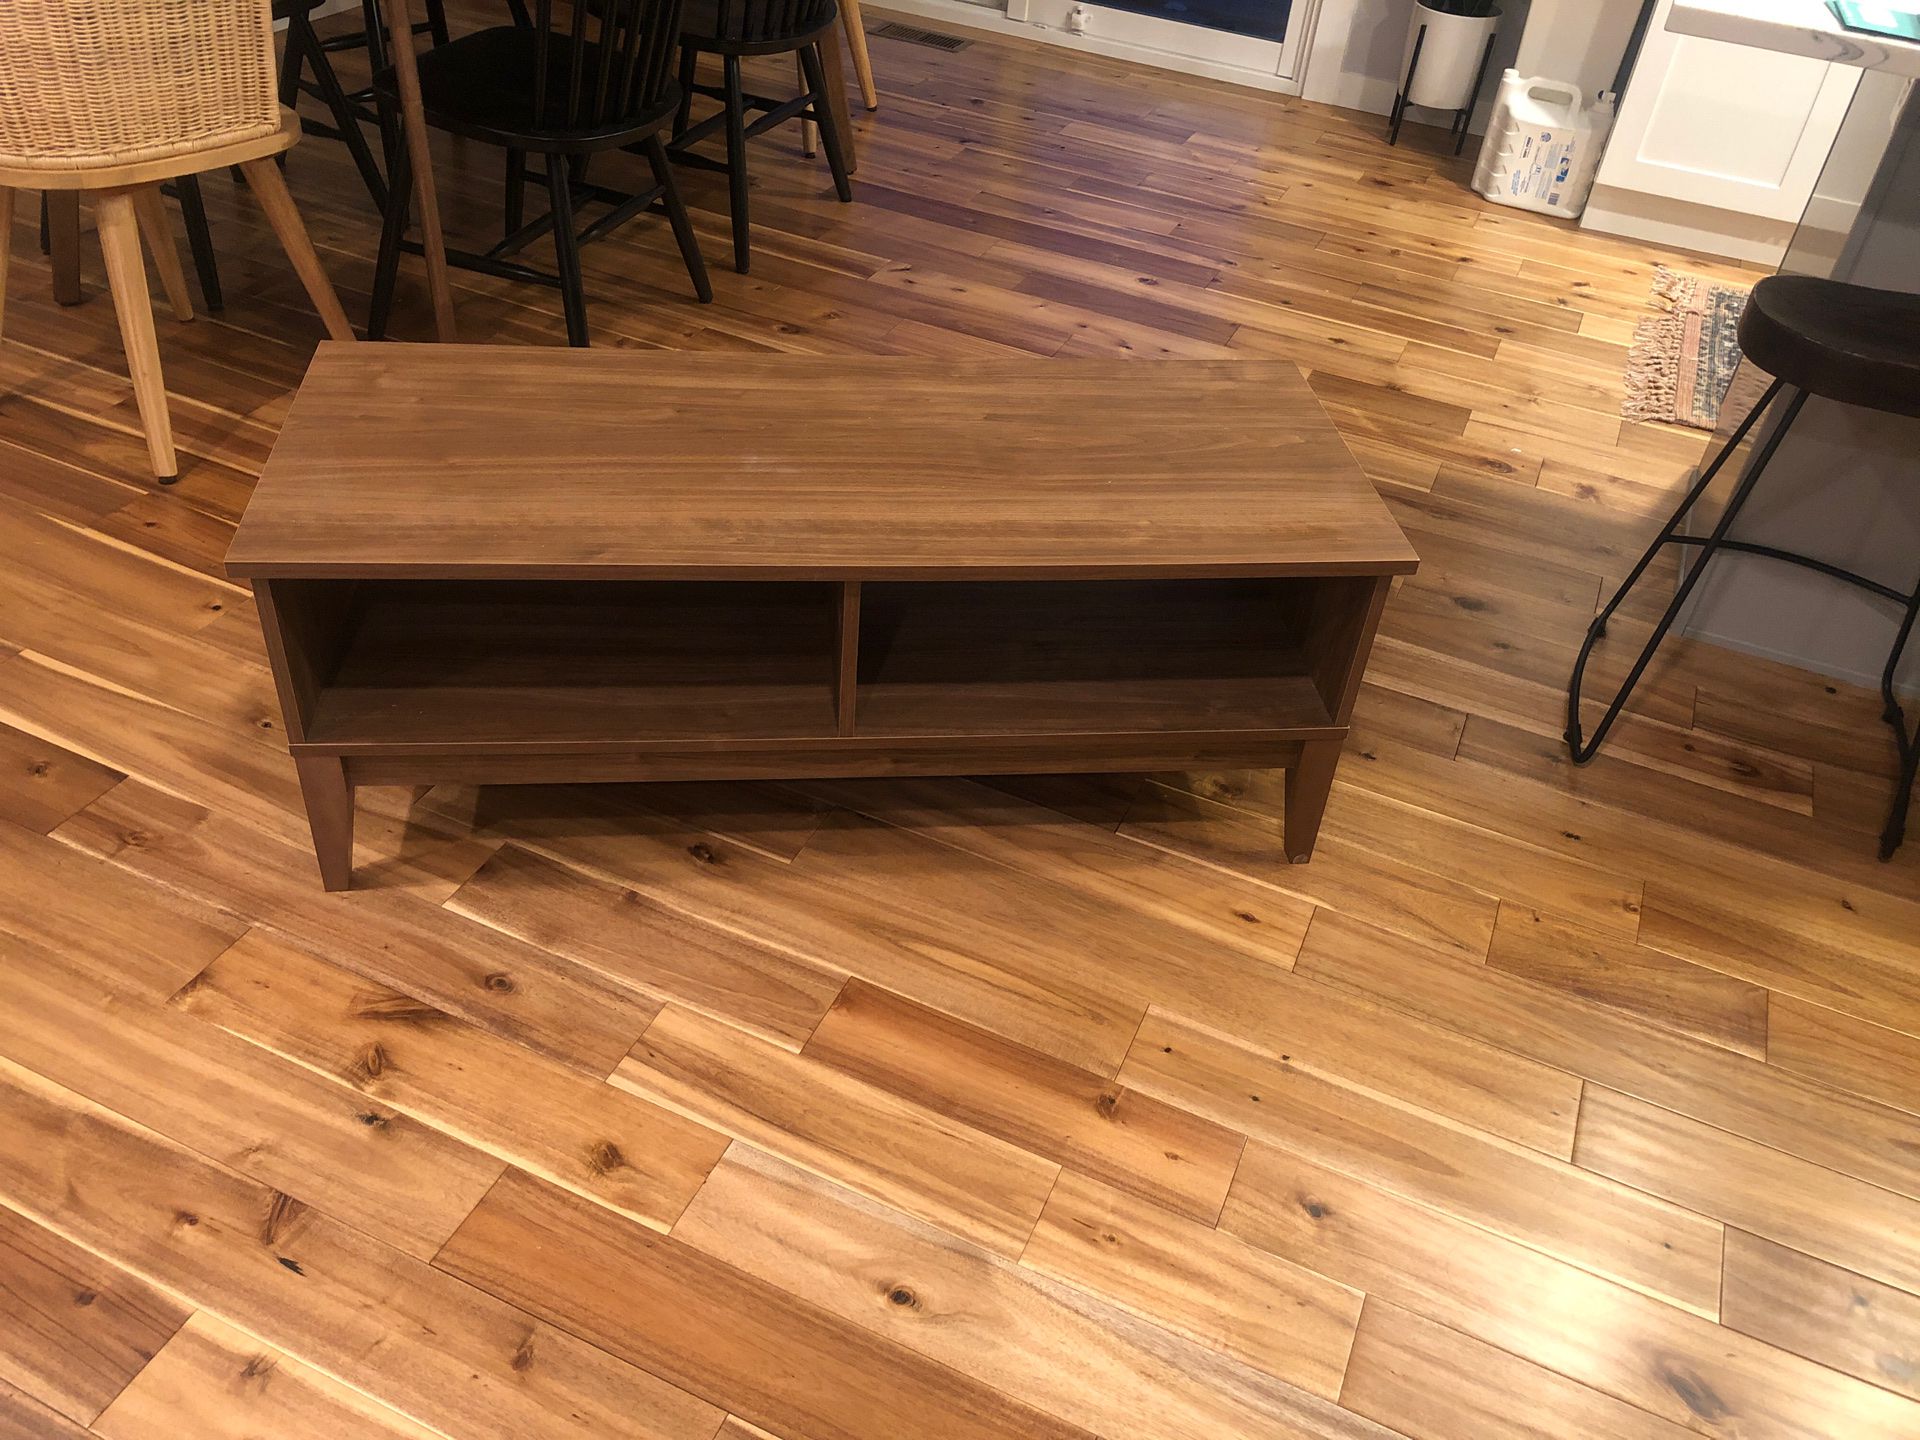 Mid century style coffee table from Target